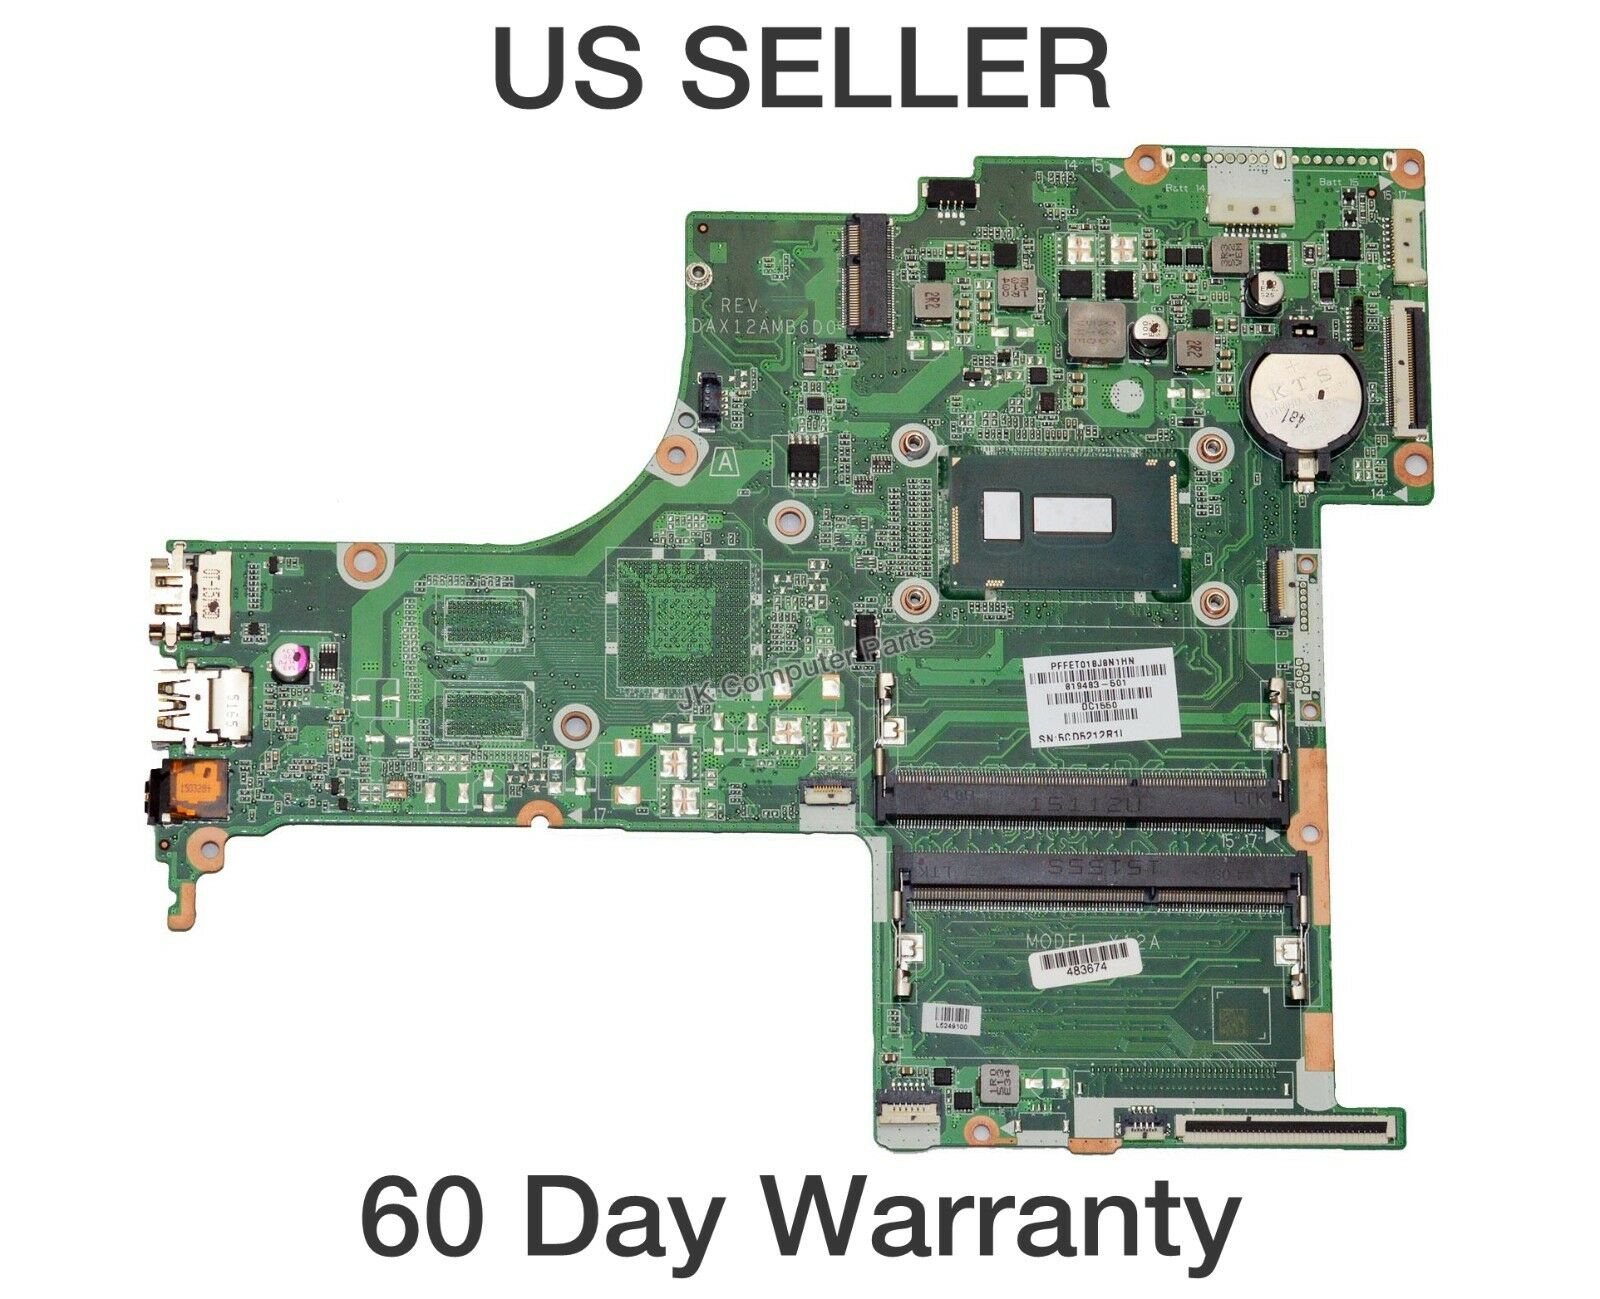 HP Pavilion 17-G015DX Laptop Motherboard Intel i7-5500U 2.4GHz CPU 819483-501 No accessories are included w